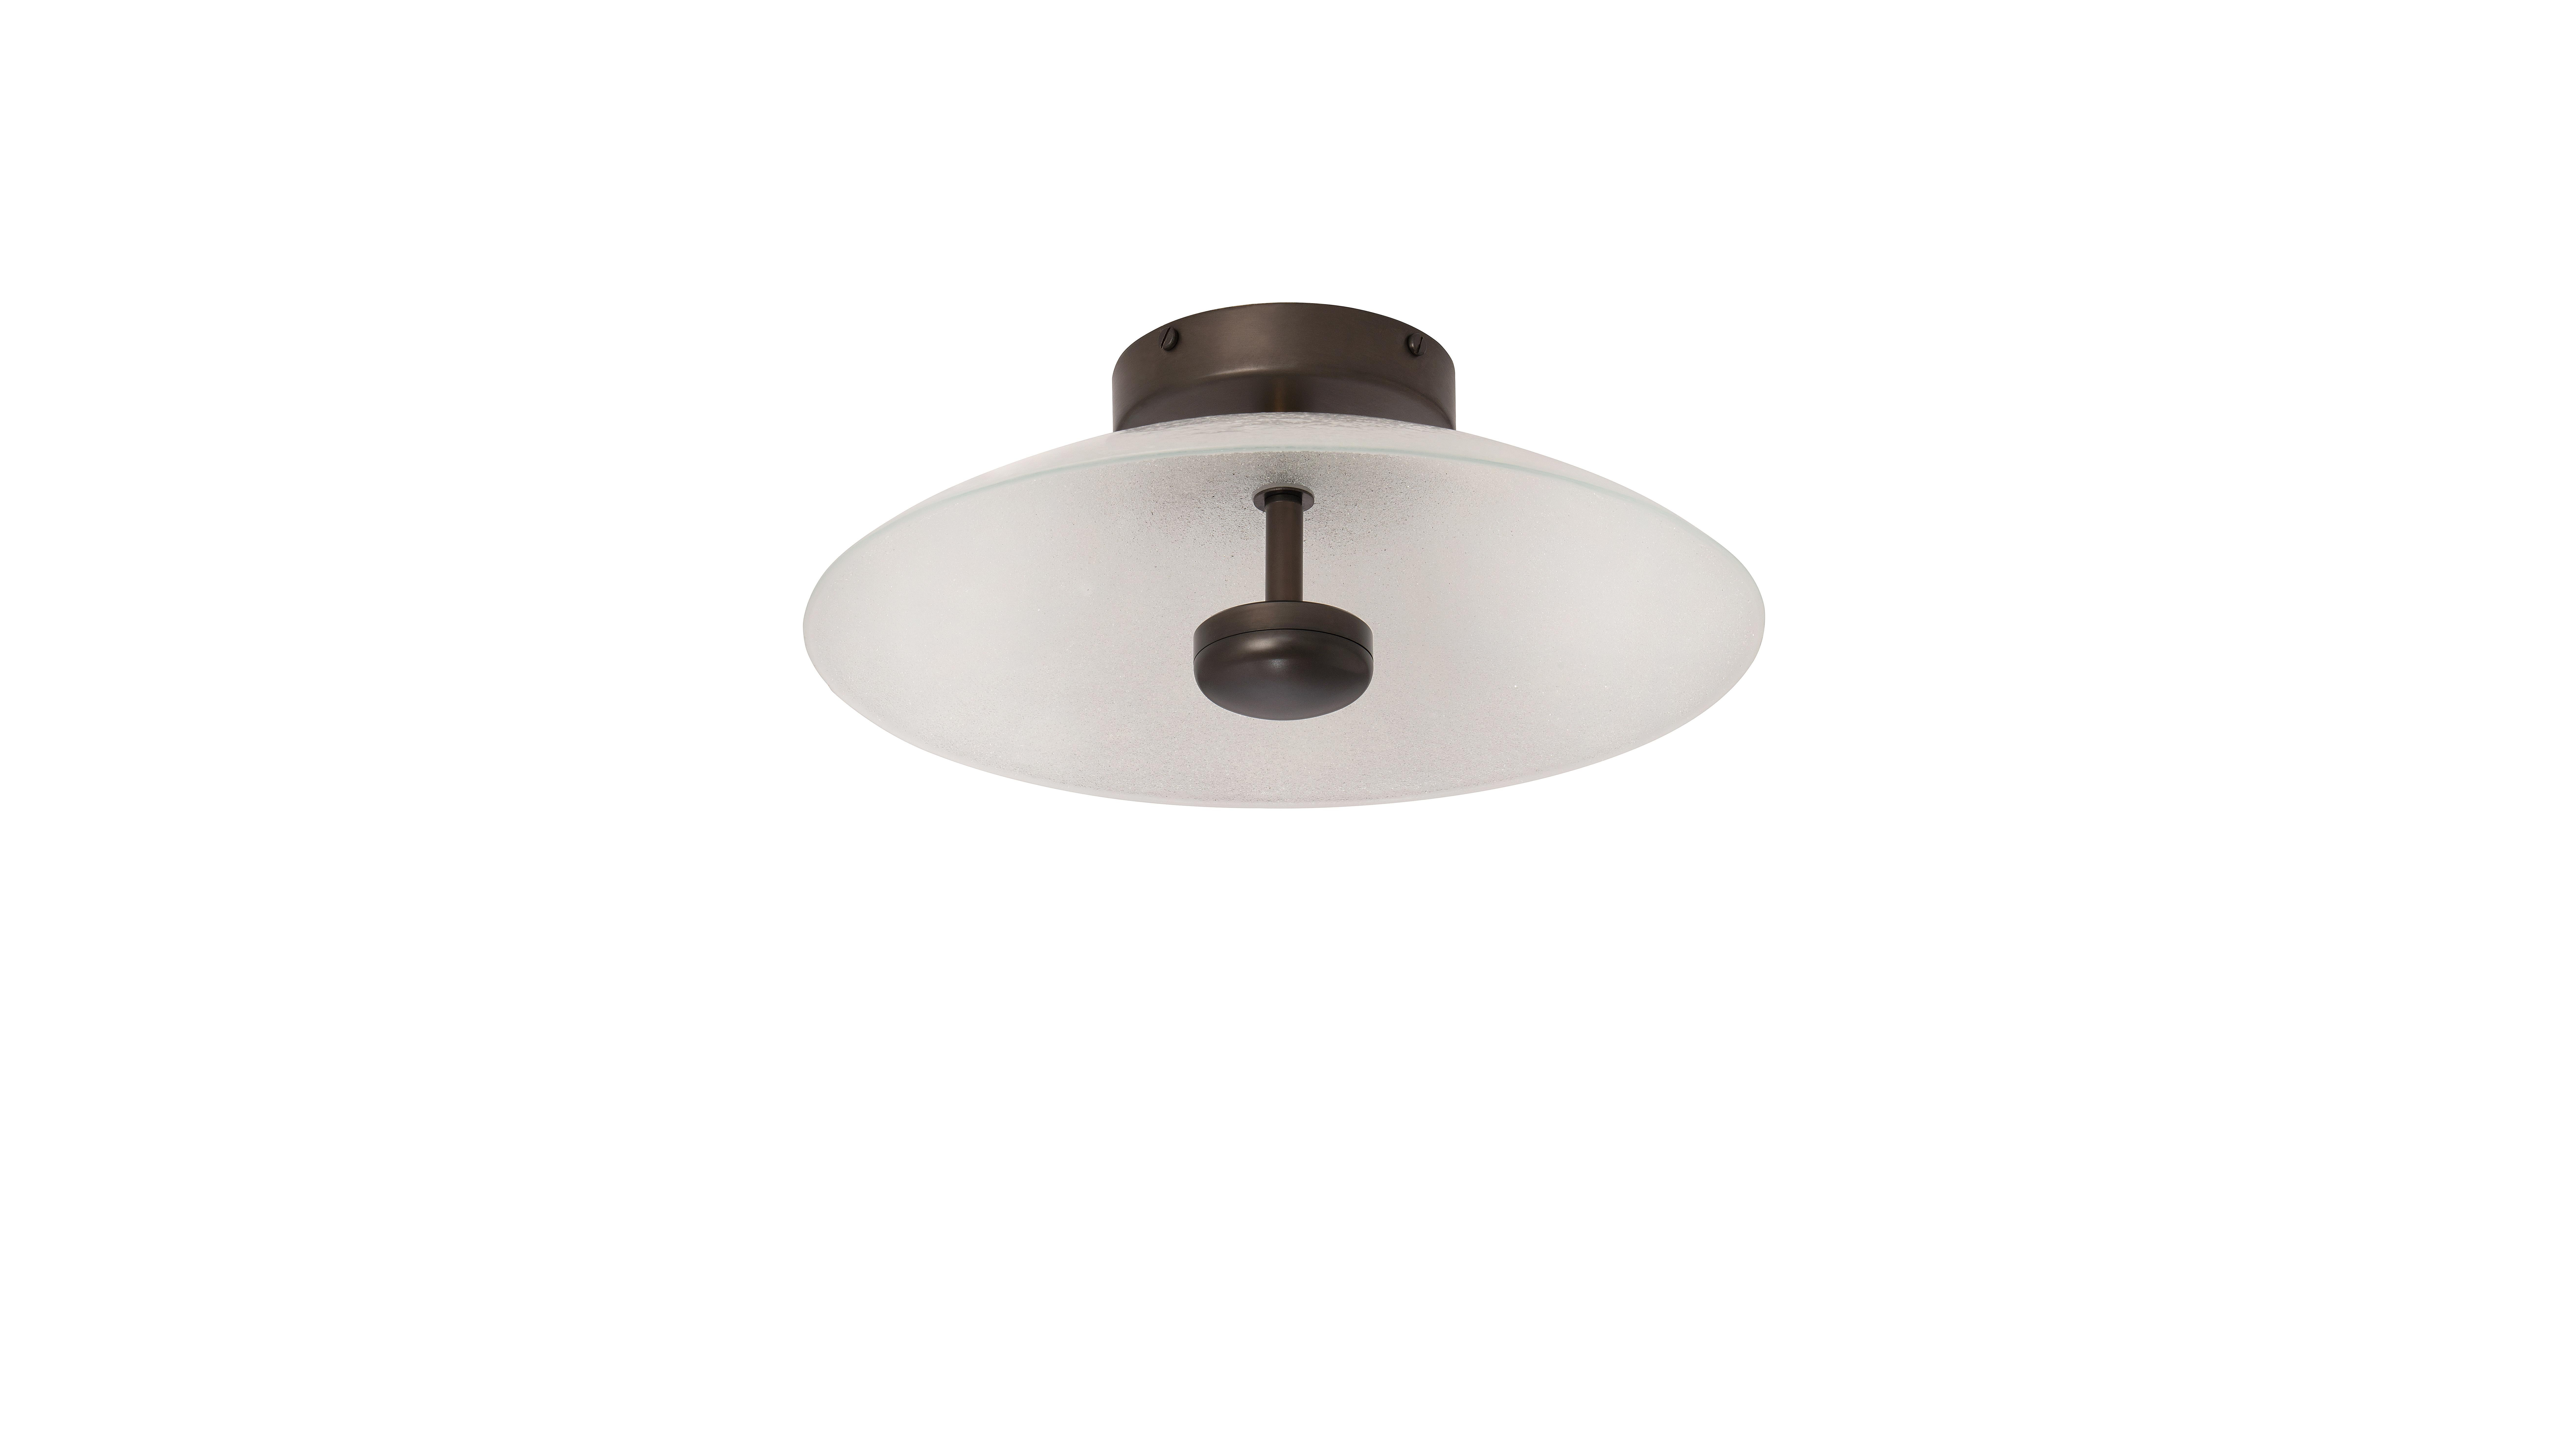 Cielo small ceiling lamp by CTO Lighting.
Materials: Bronze with hand fritted glass
Dimensions: W 31.5 x D 31.5 x H 13 cm

Integrated LED - trailing dimmable - 8w - 2700k 
Weight 3.5kg (7.7lbs)
Mounts onto 4” junction box

All our lamps can be wired